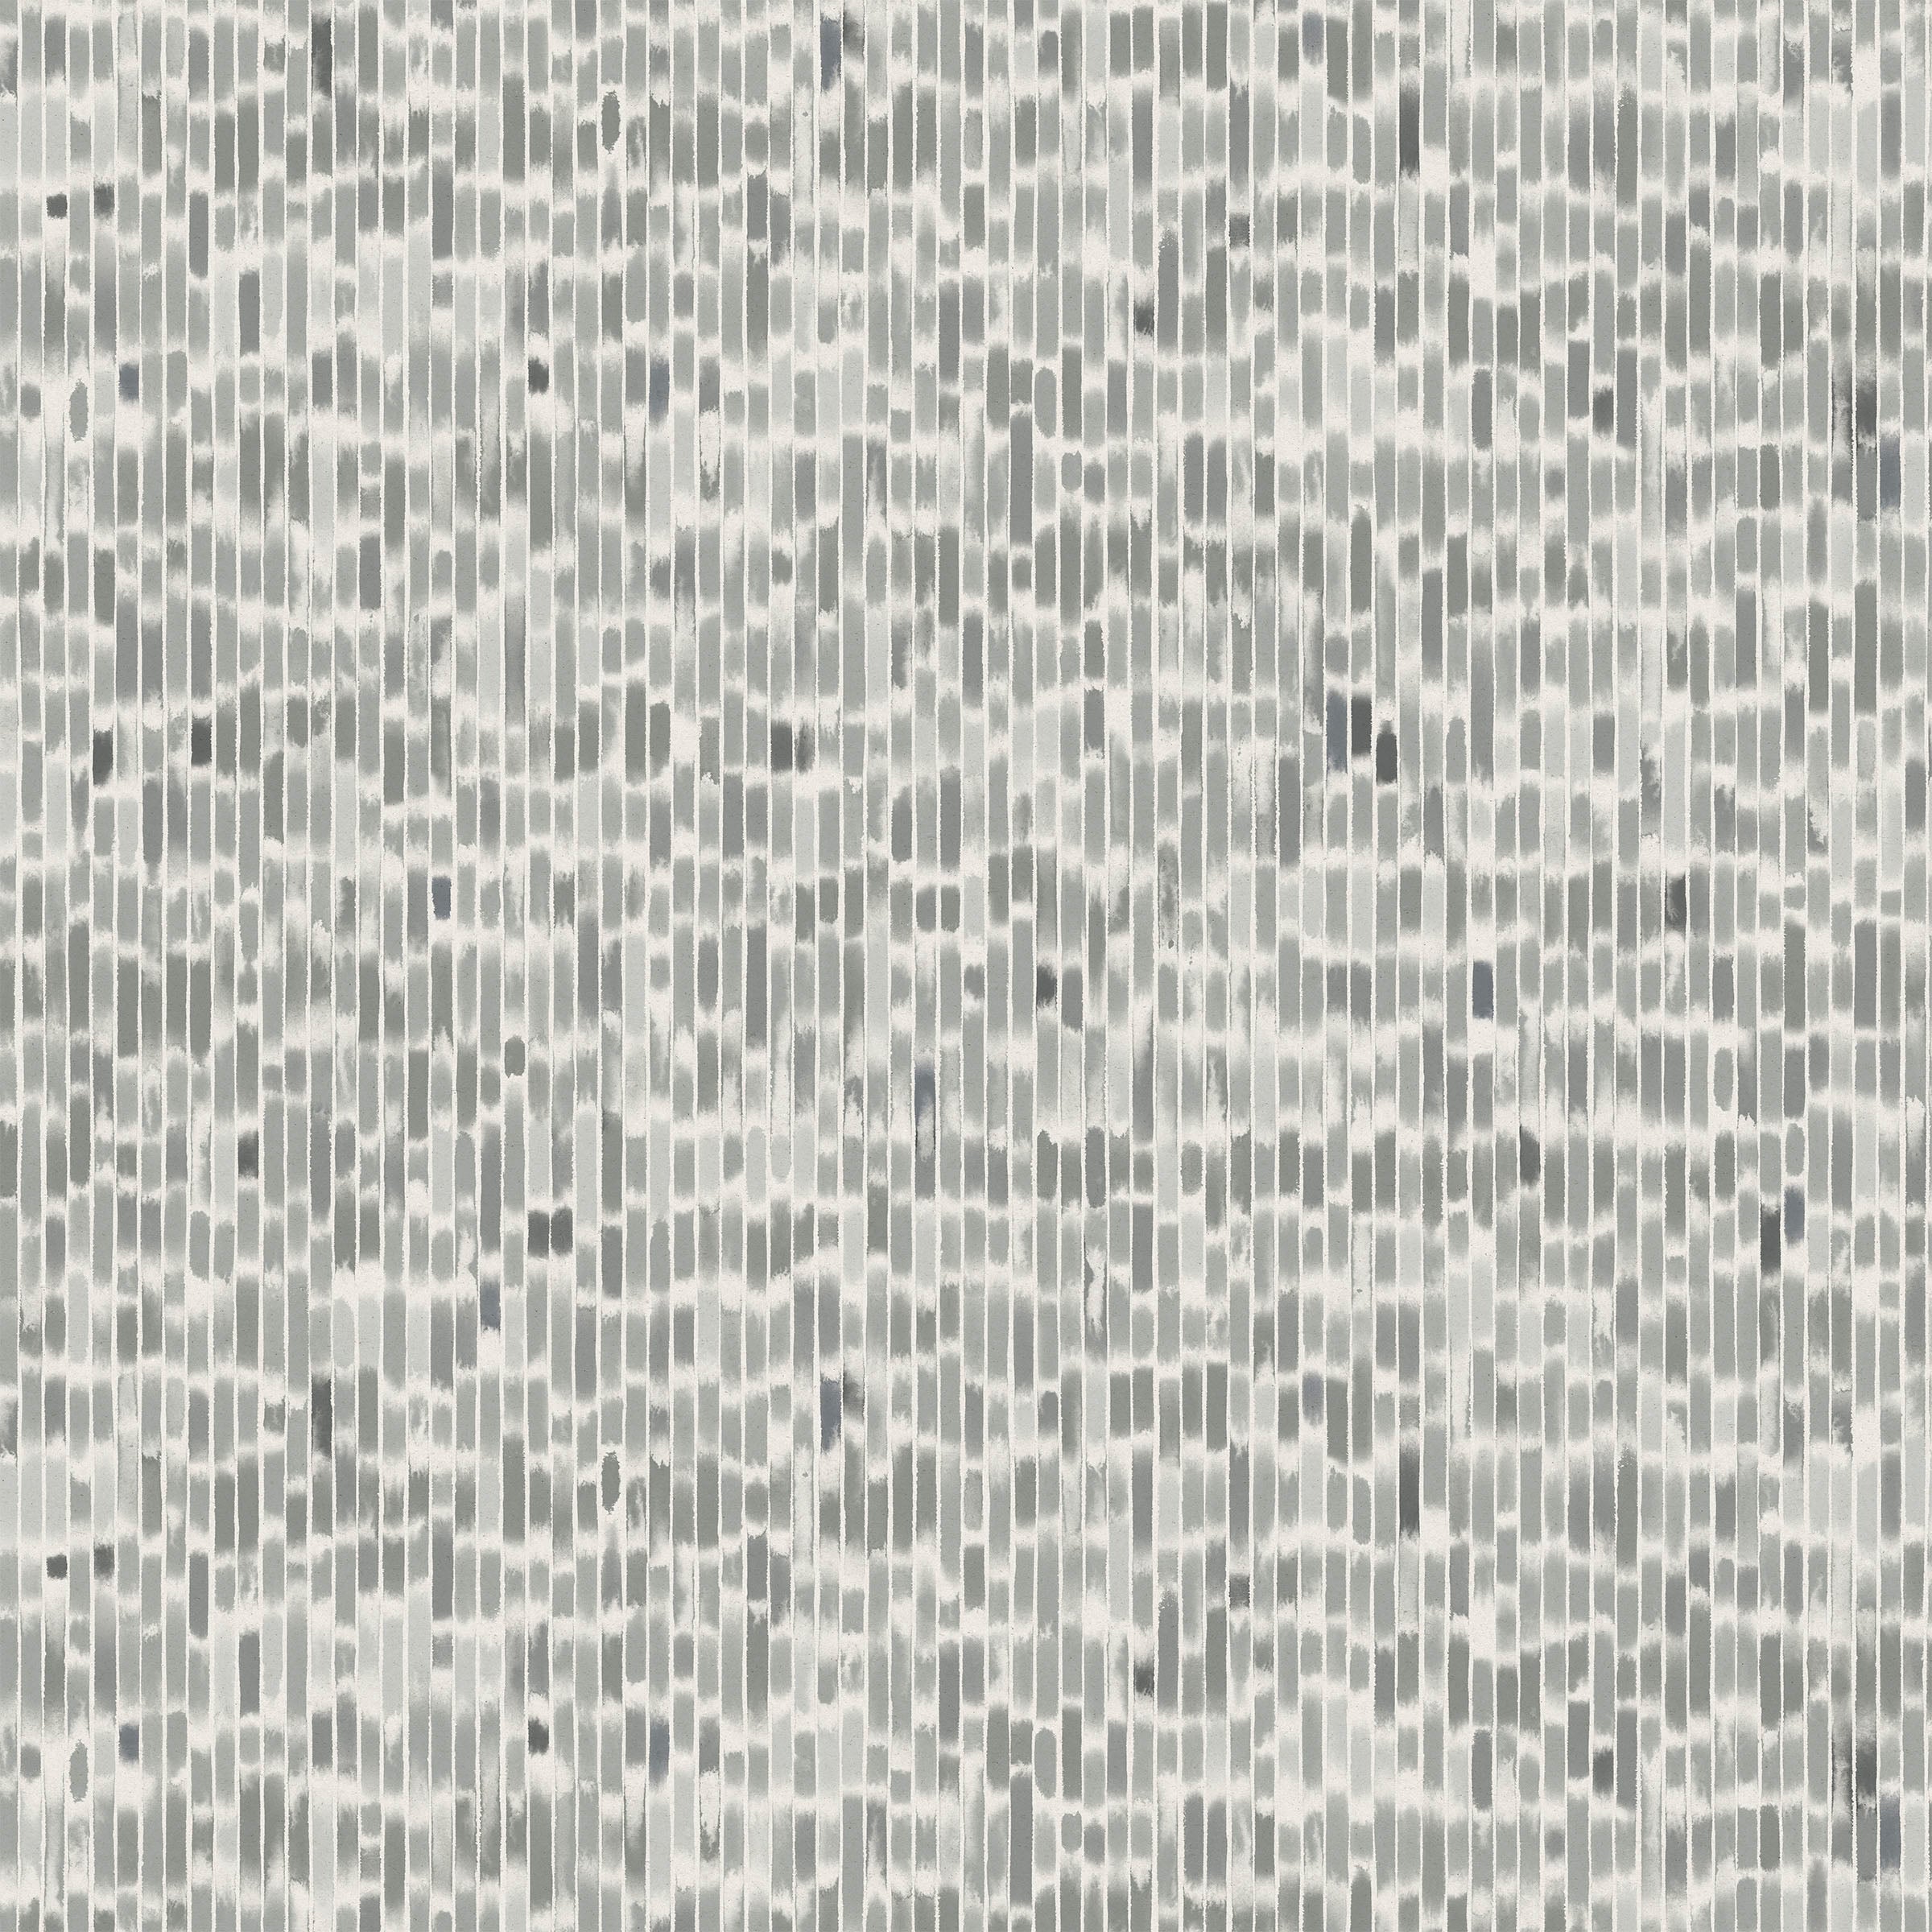 Detail of fabric in a linear check pattern in shades of gray on a white field.